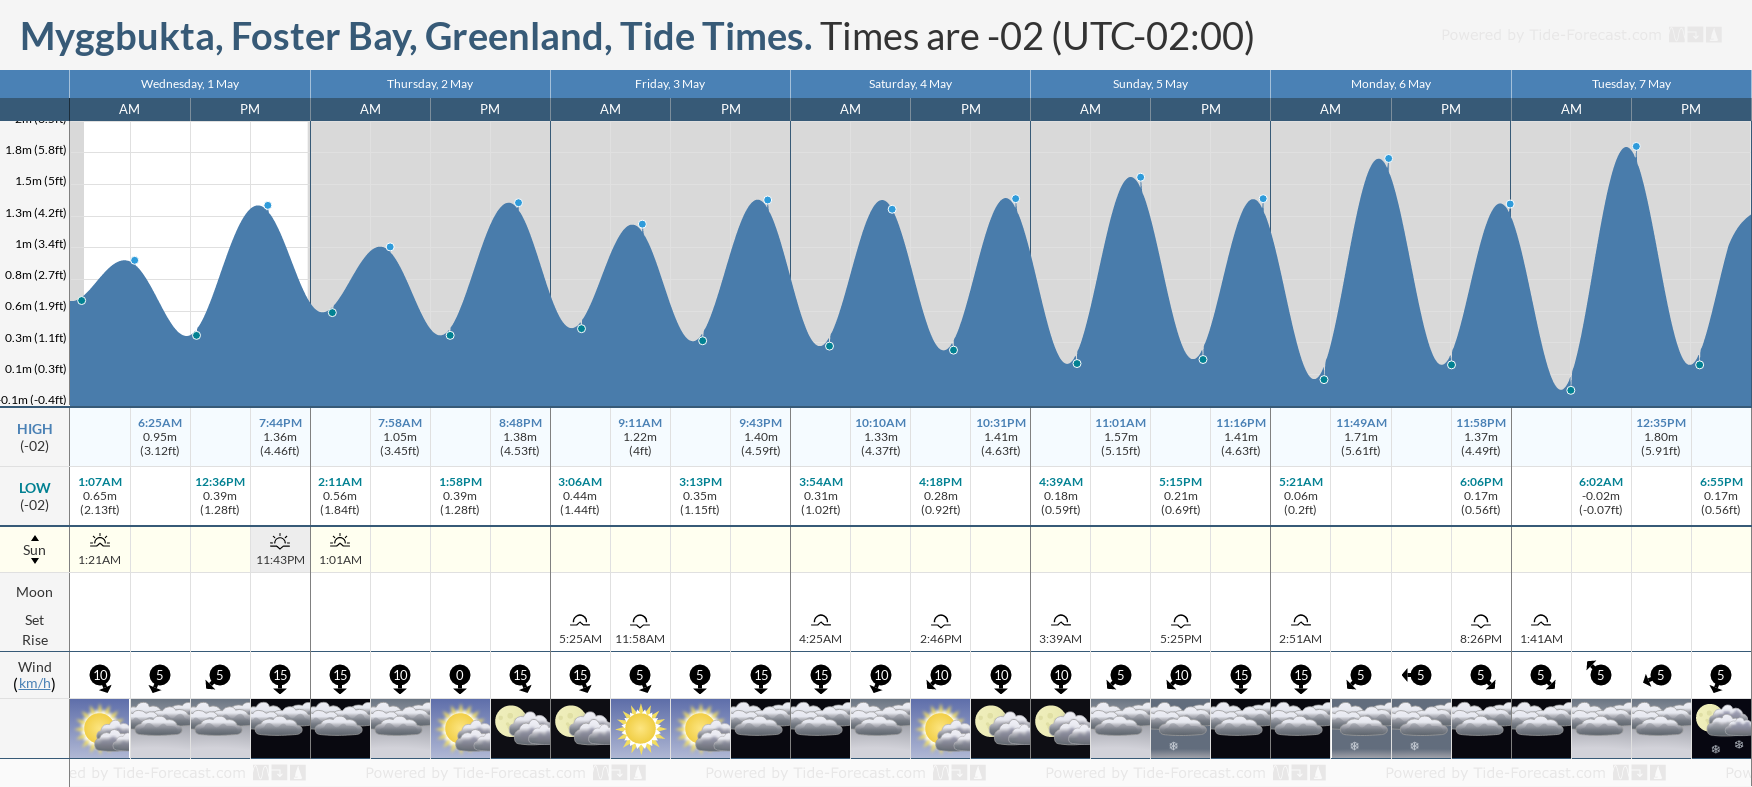 Myggbukta, Foster Bay, Greenland Tide Chart including high and low tide tide times for the next 7 days